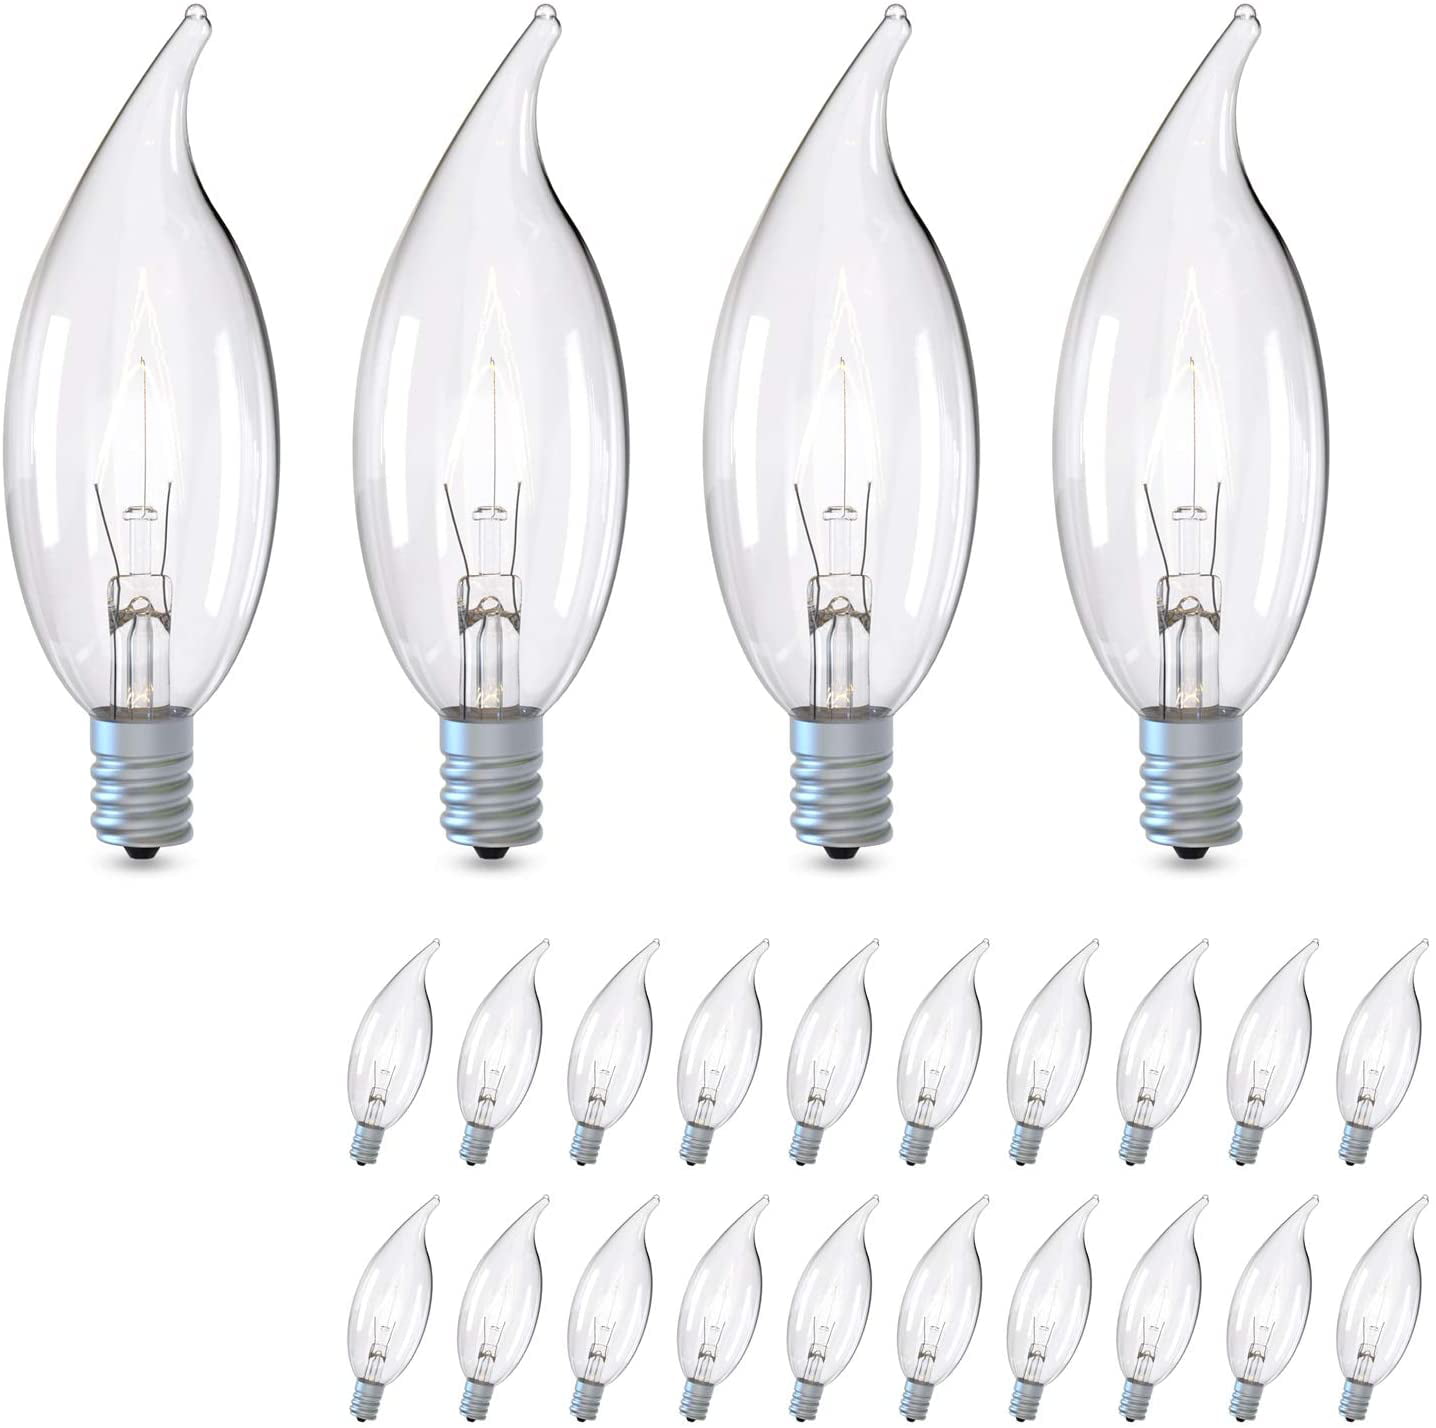 40W Clear Candle Small Edison Screw Light Bulbs Cap SES E14 Base Lamp 10 Pack 